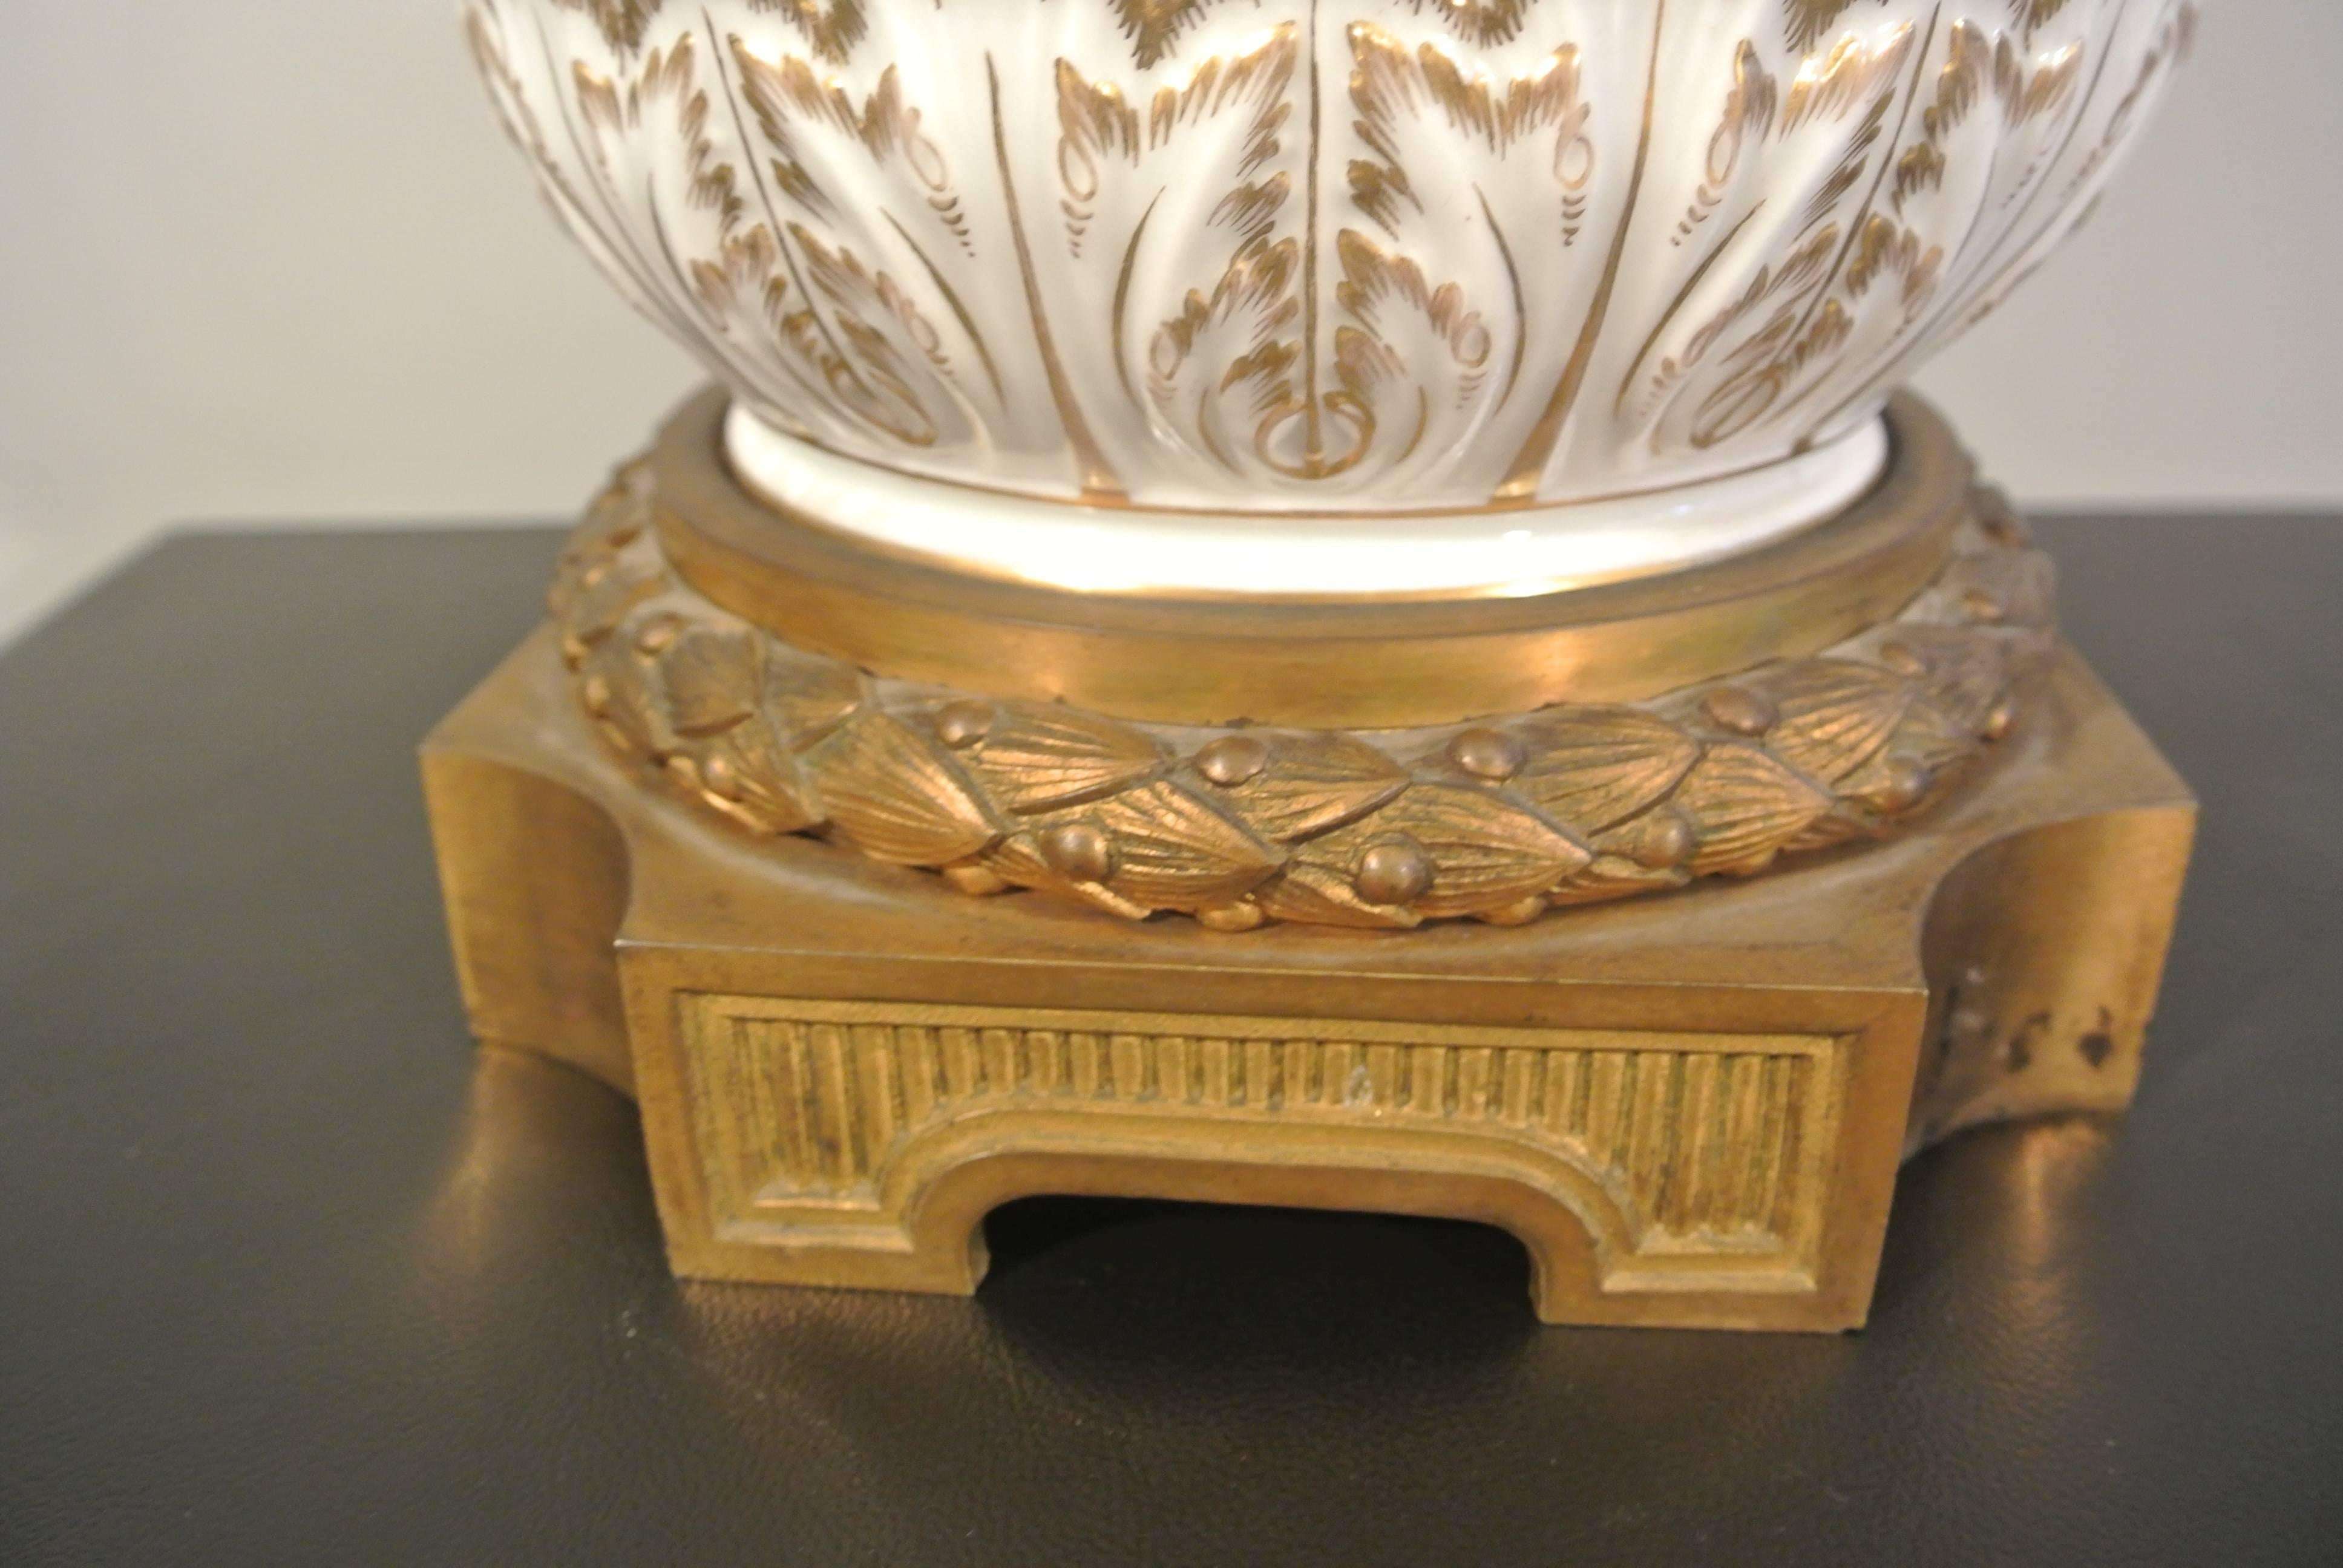 Faience Covered Porcelain Bronze on Gilded Bronze Base from the 19th Century